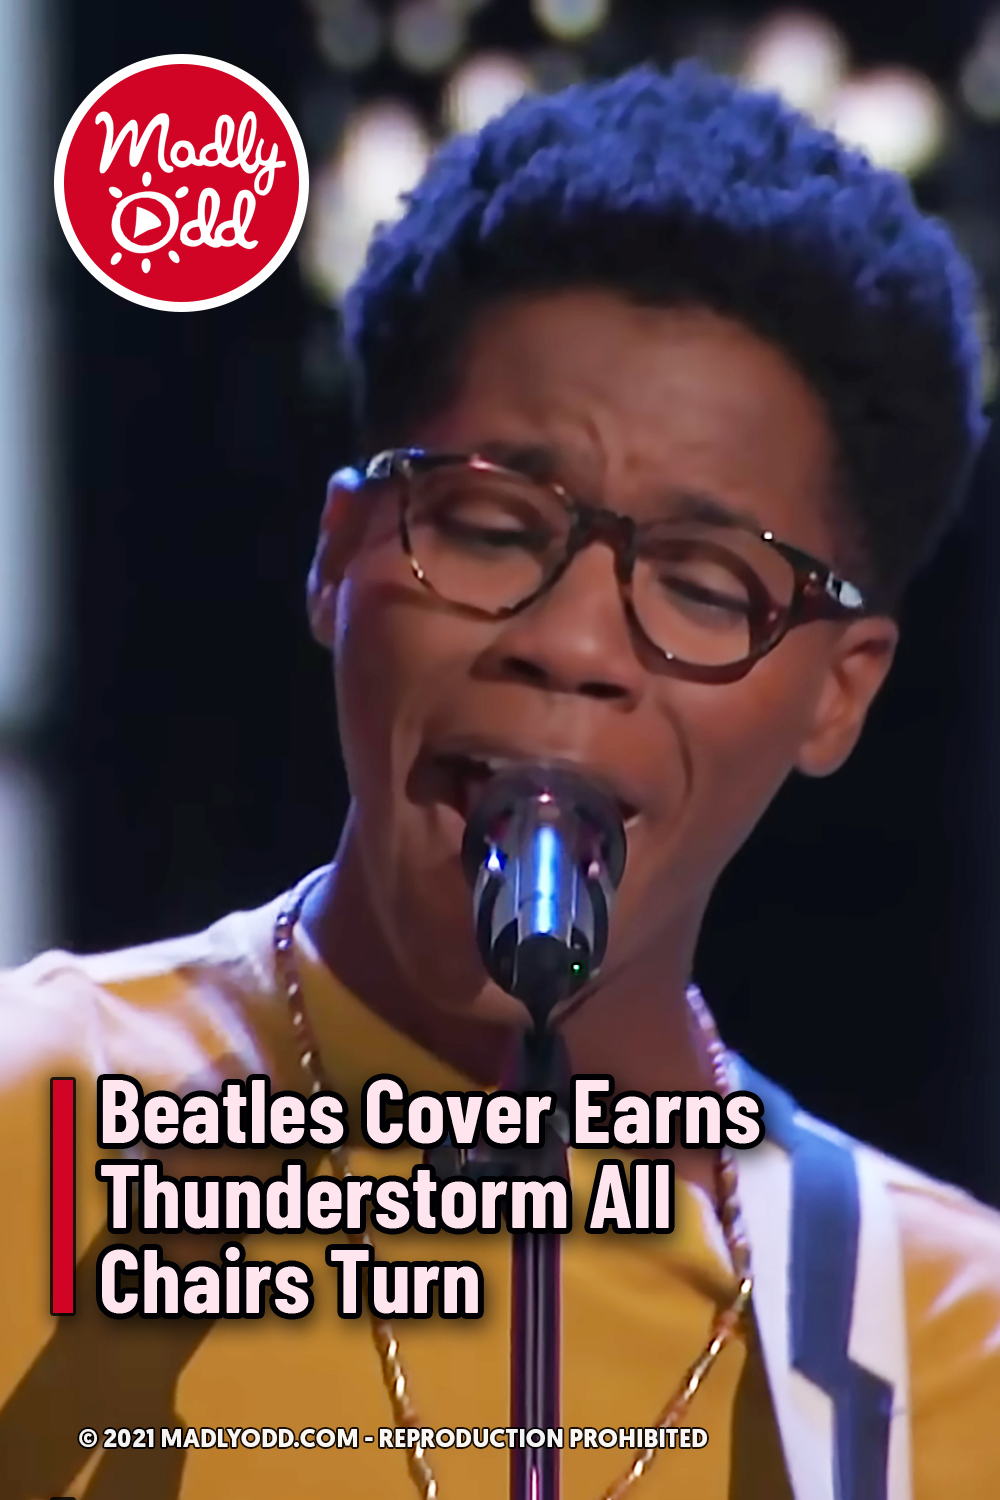 Beatles Cover Earns Thunderstorm All Chairs Turn